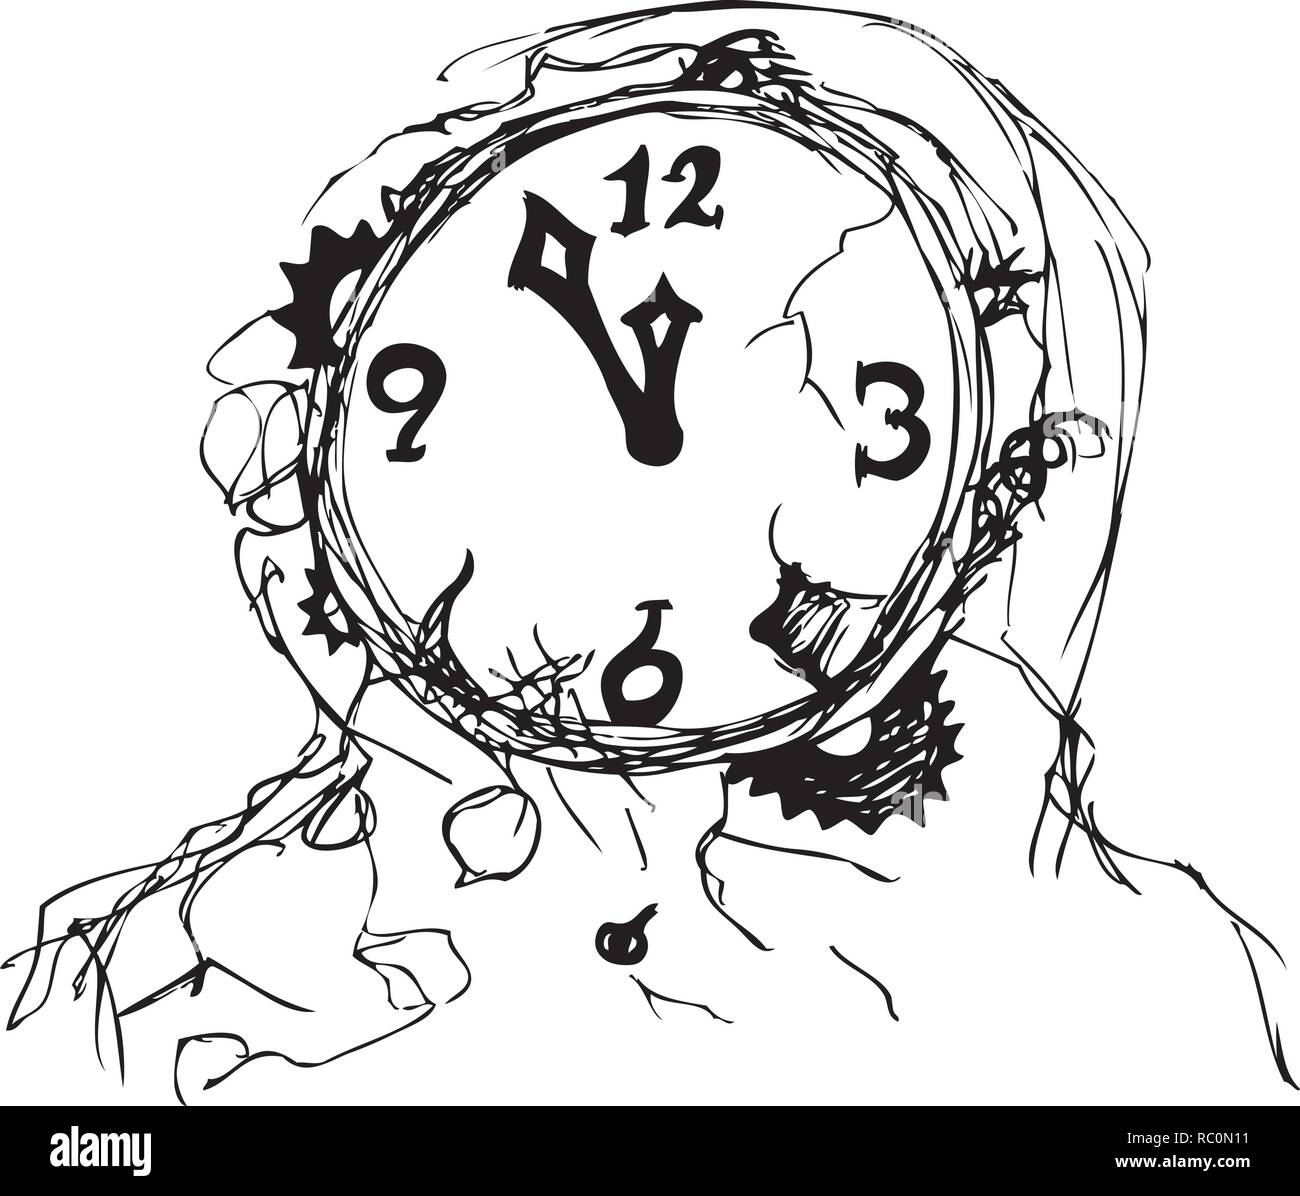 Sketch of an old damaged clock. Stock Vector